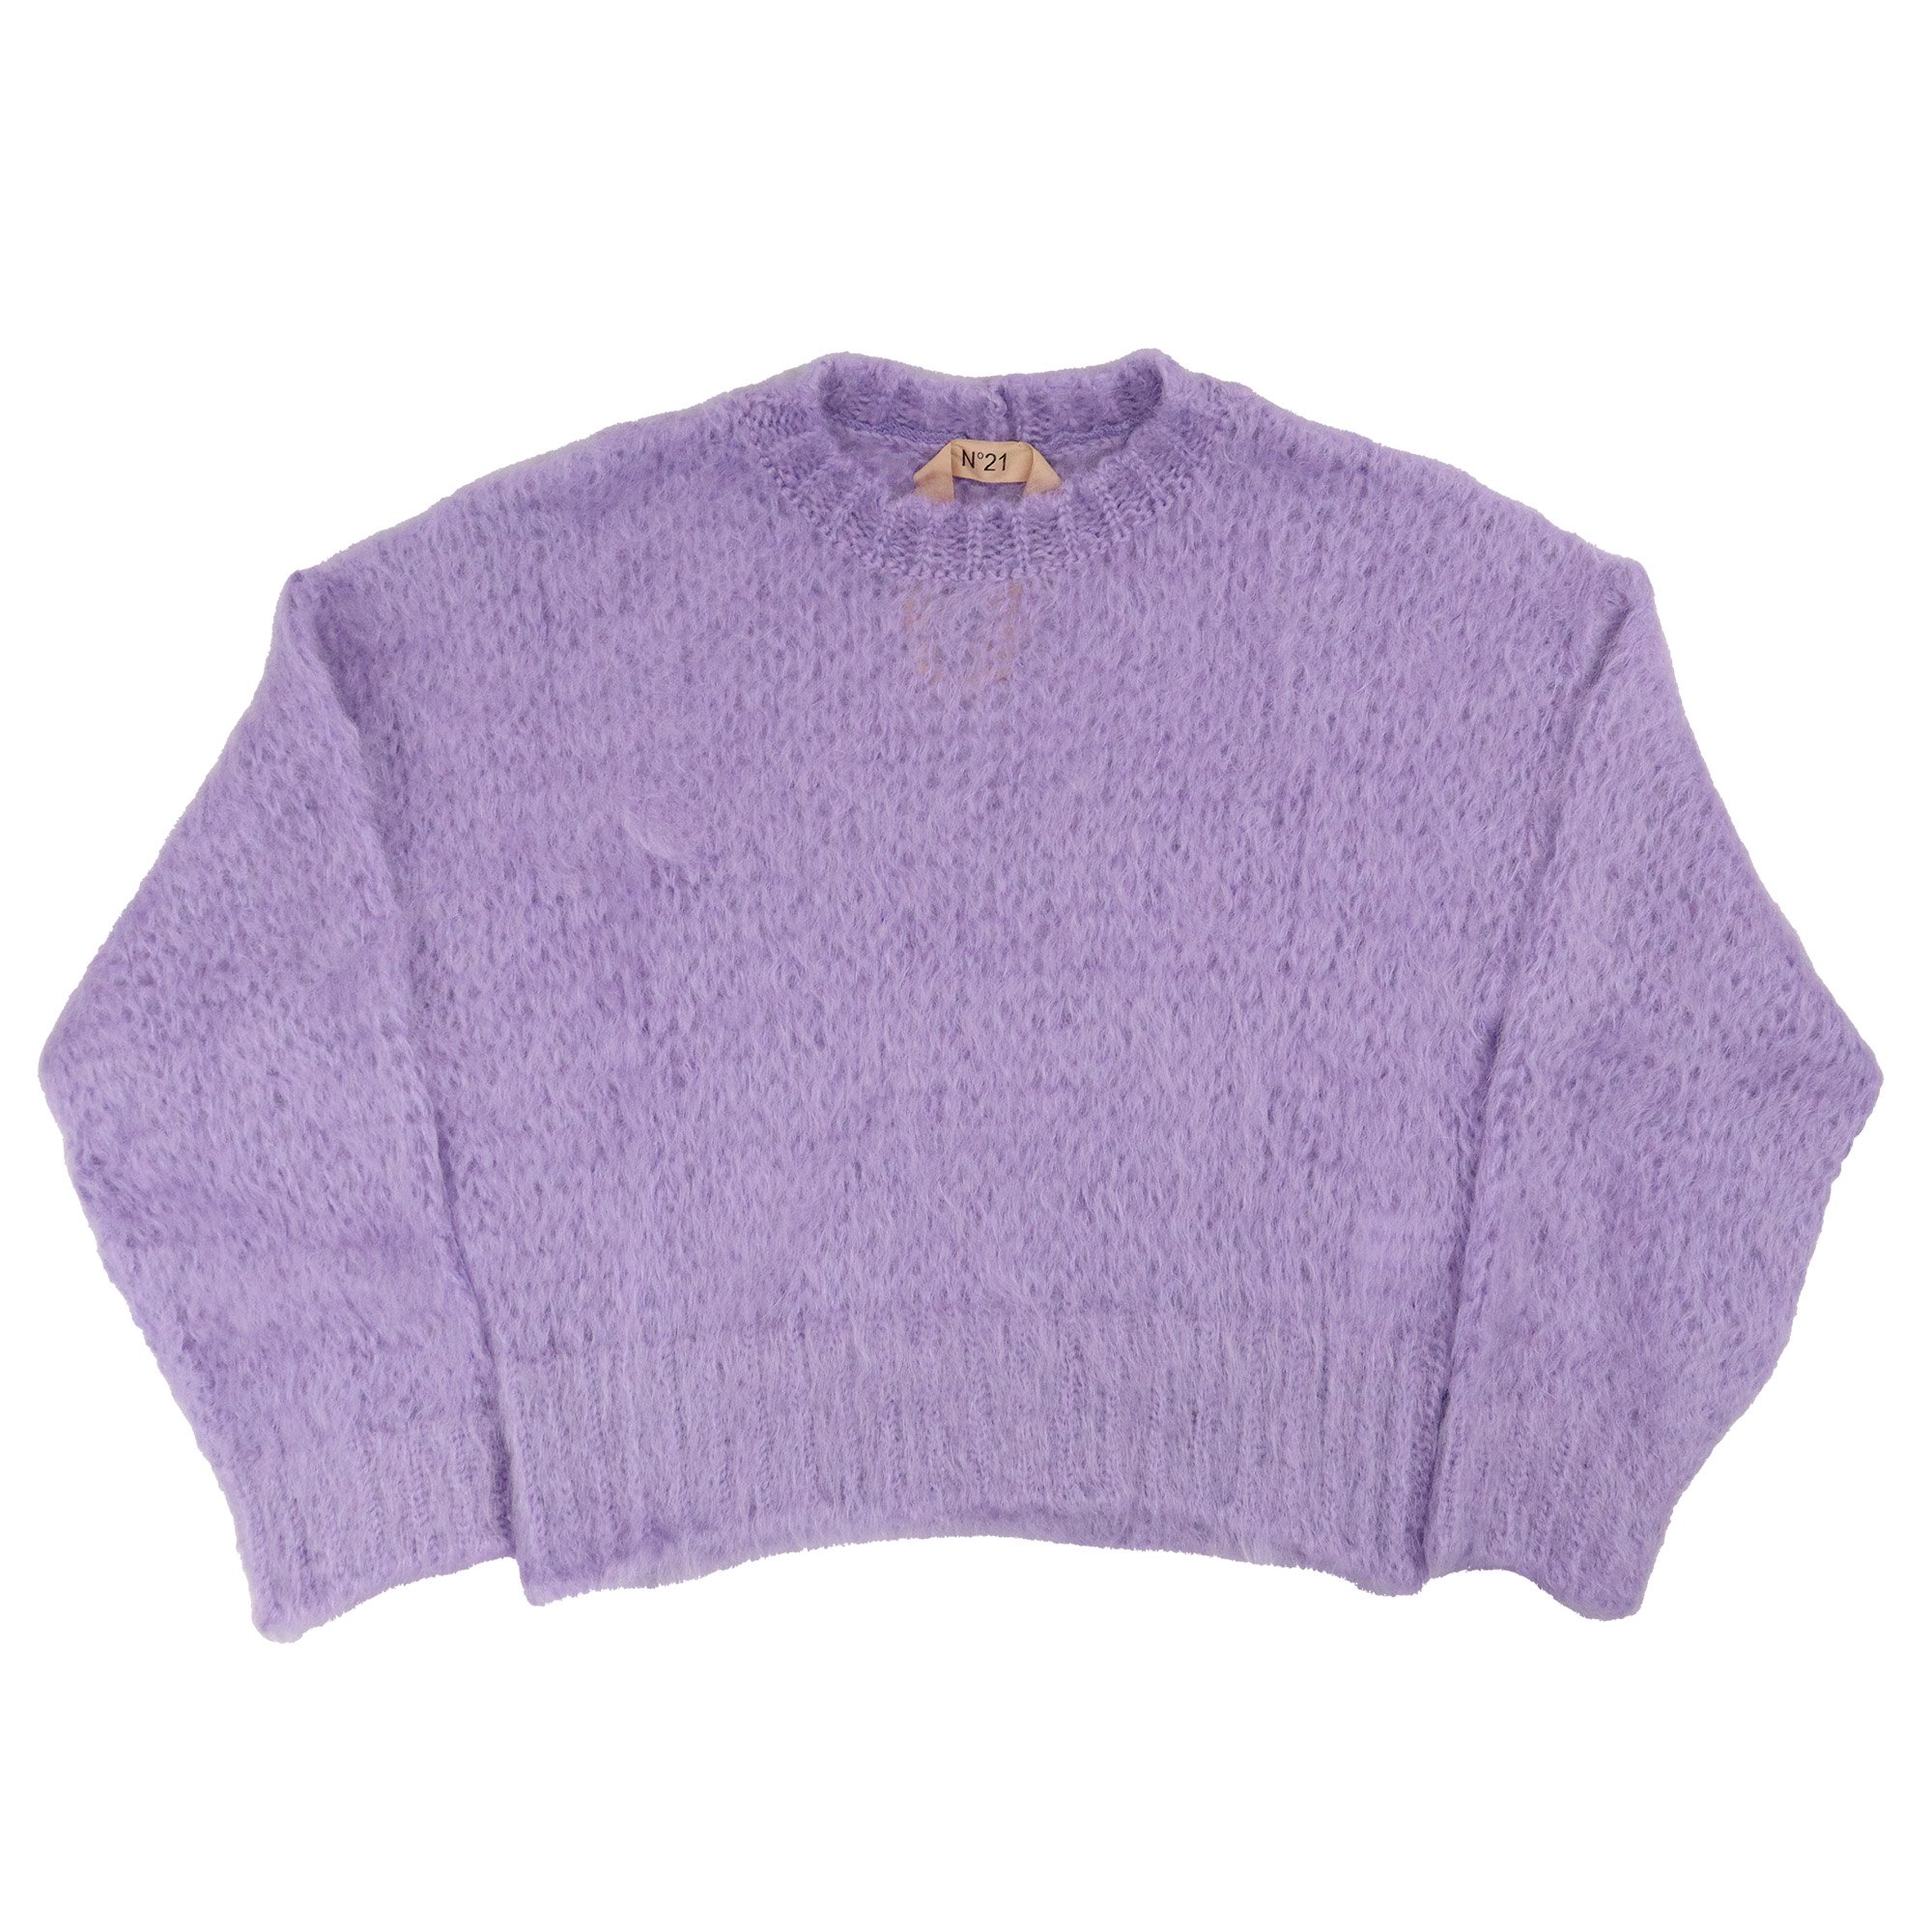 <img class='new_mark_img1' src='https://img.shop-pro.jp/img/new/icons47.gif' style='border:none;display:inline;margin:0px;padding:0px;width:auto;' />N21 MOHAIR KNITPURPLE